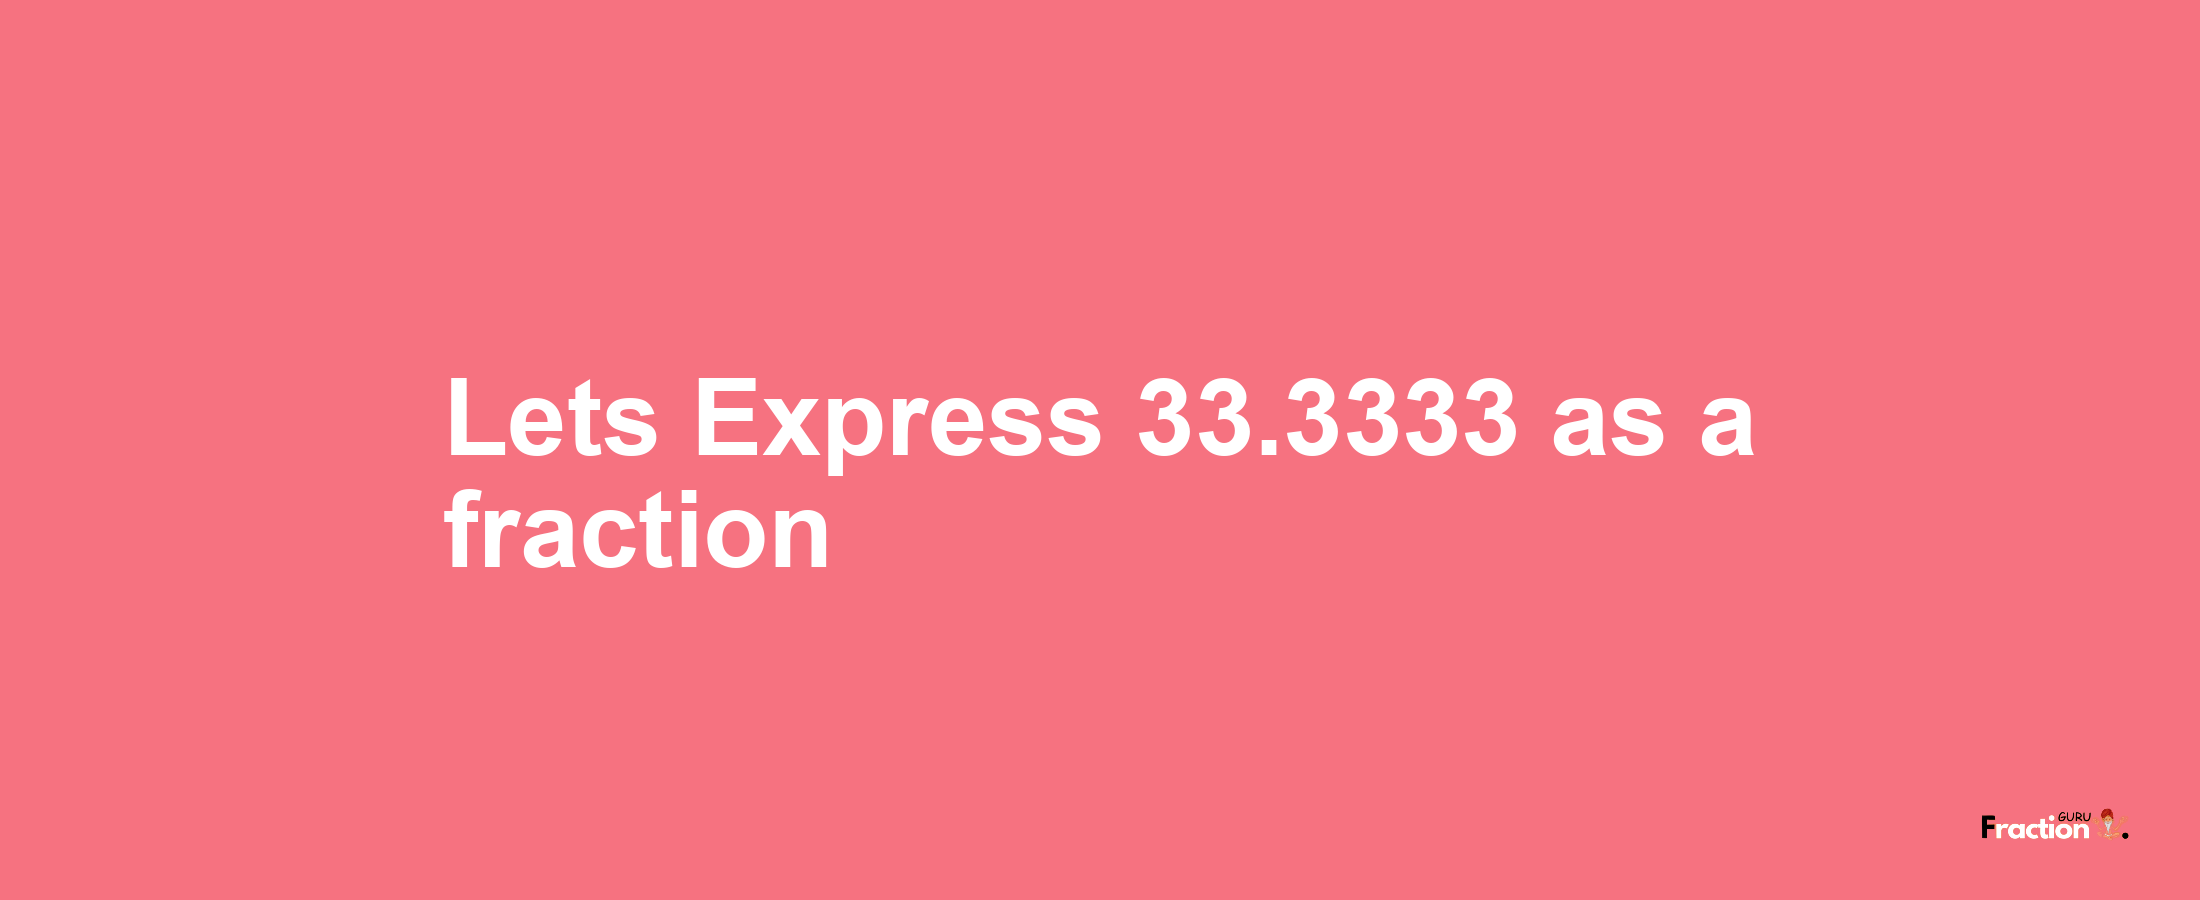 Lets Express 33.3333 as afraction